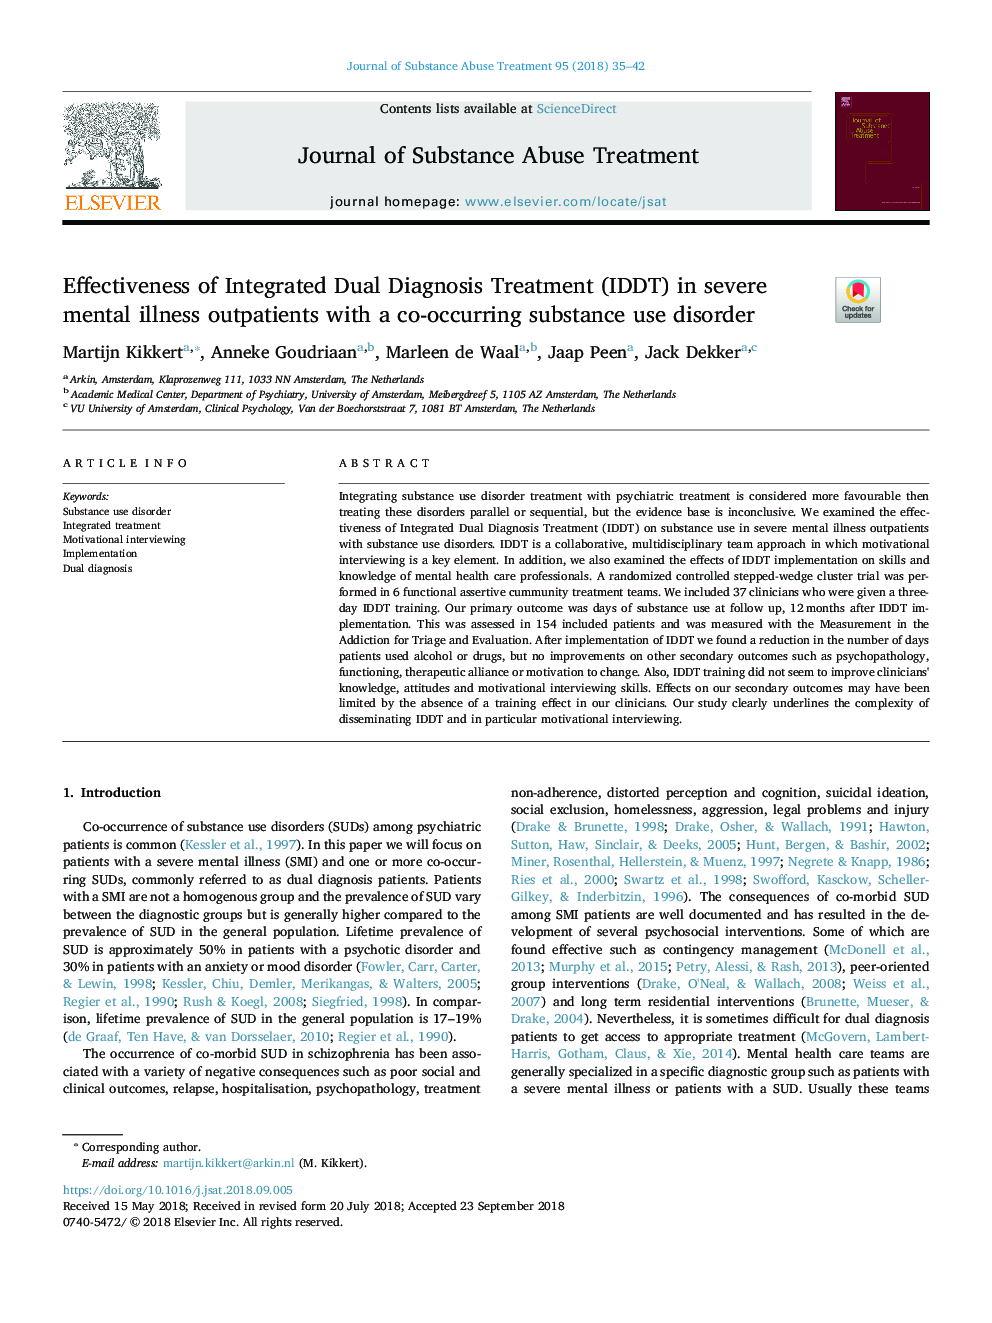 Effectiveness of Integrated Dual Diagnosis Treatment (IDDT) in severe mental illness outpatients with a co-occurring substance use disorder